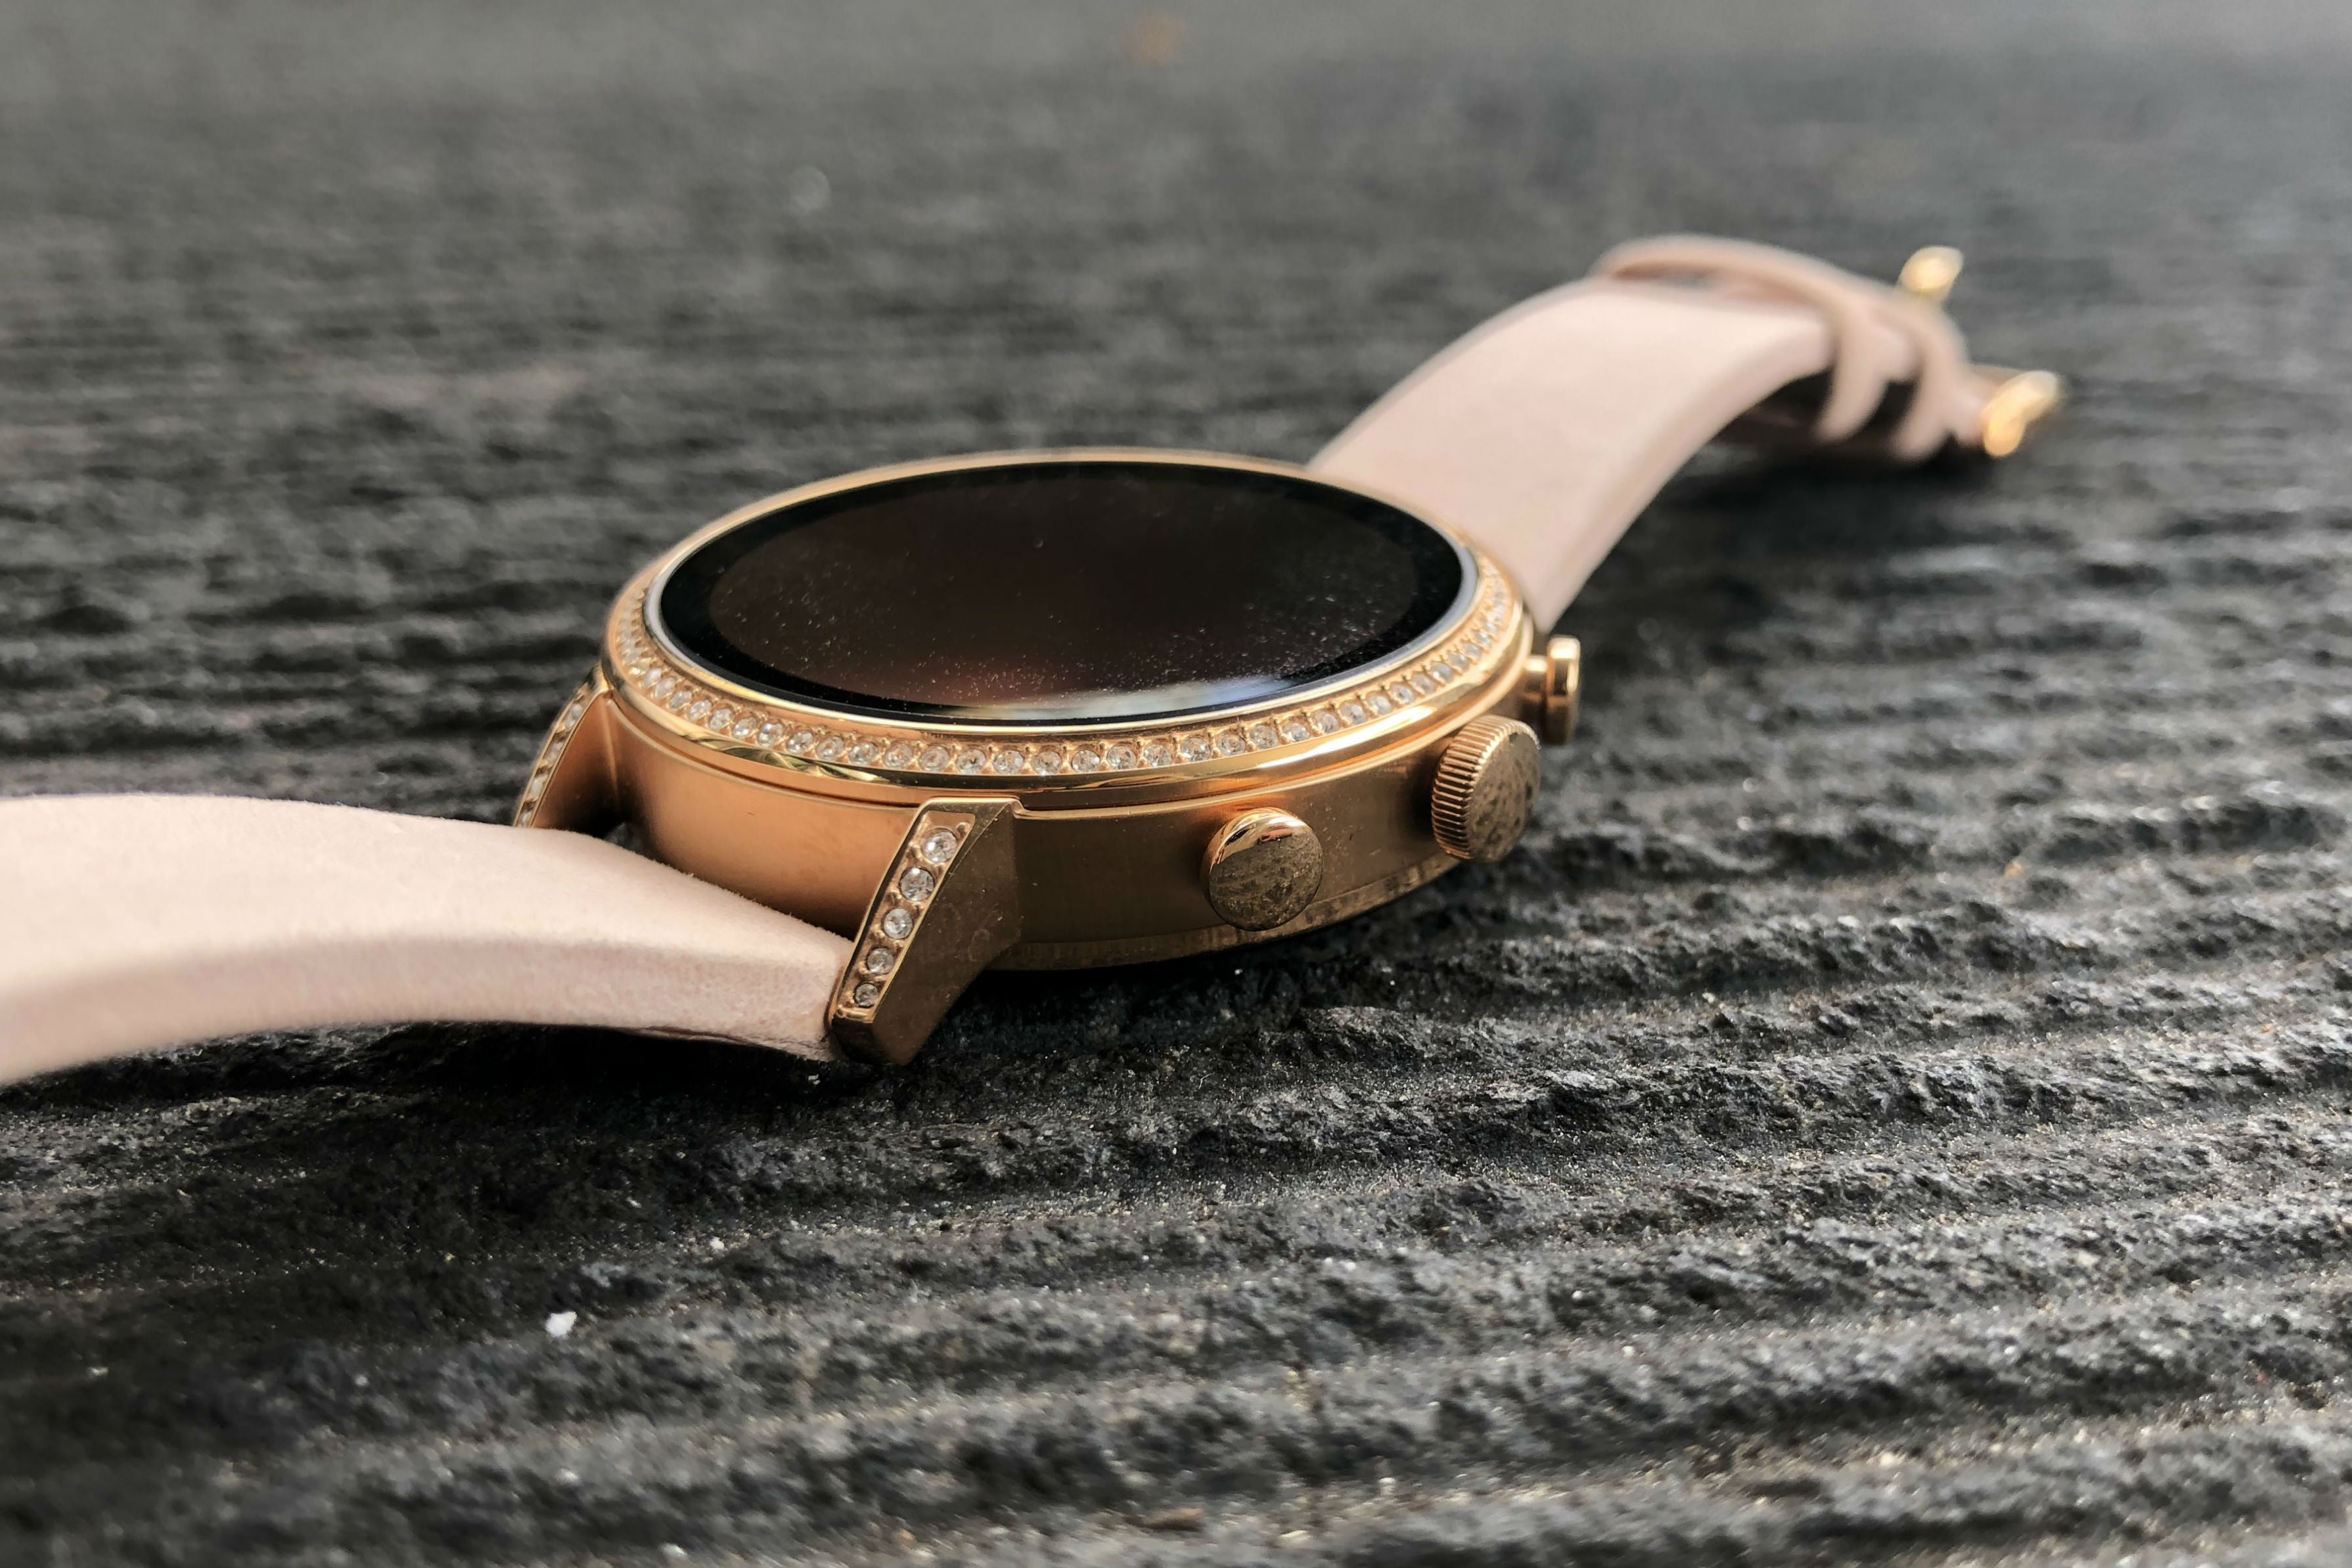 Fossil Q Venture HR review - hardware buttons